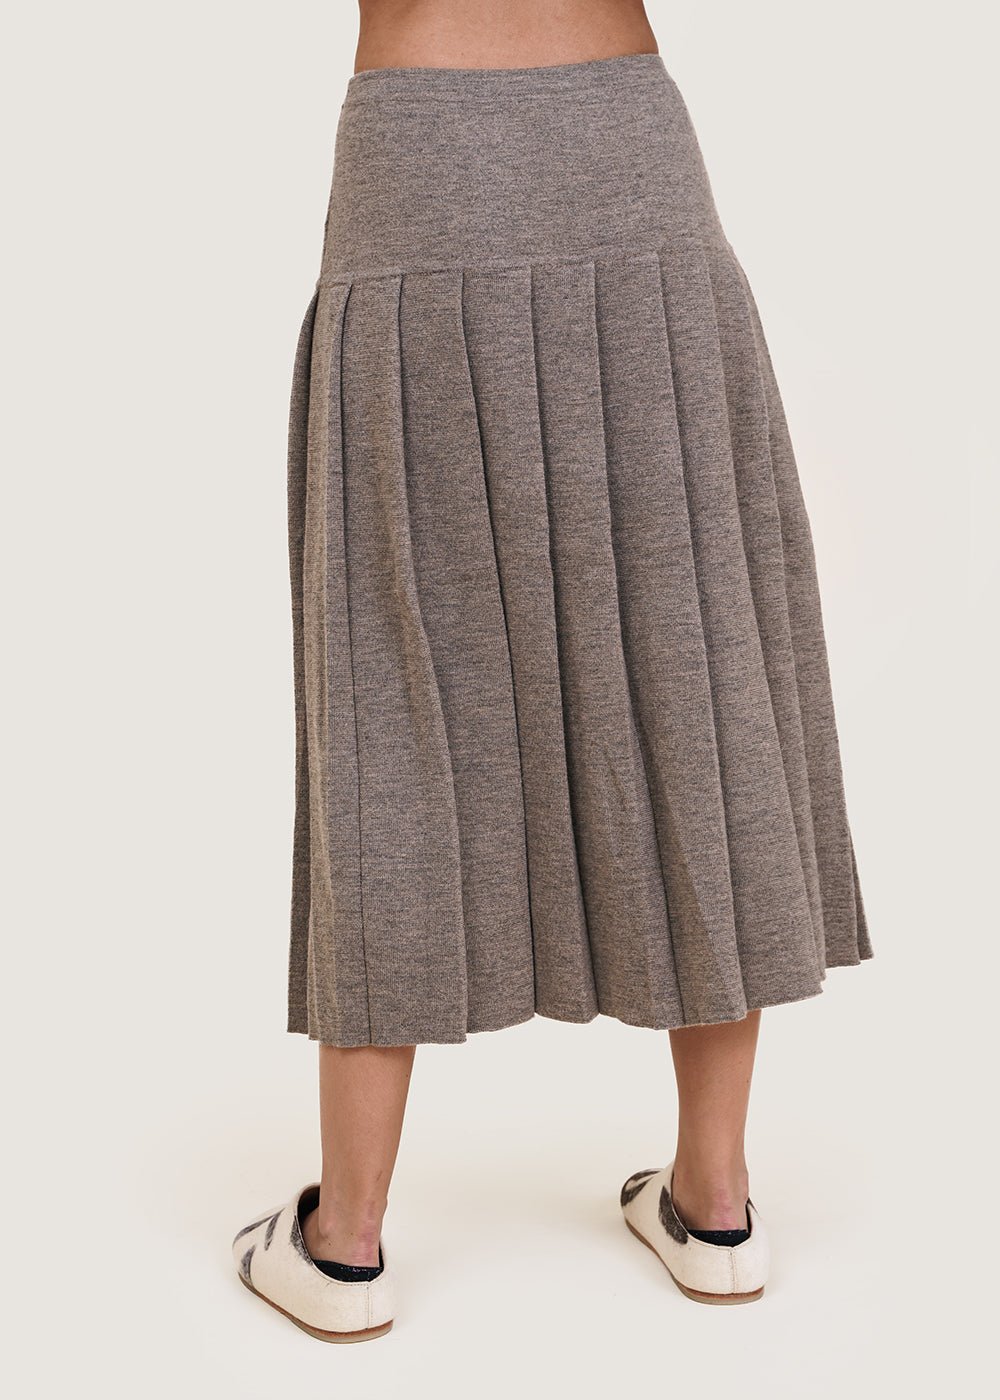 Lauren Manoogian Rock Pleat Skirt - New Classics Studios Sustainable Ethical Fashion Canada